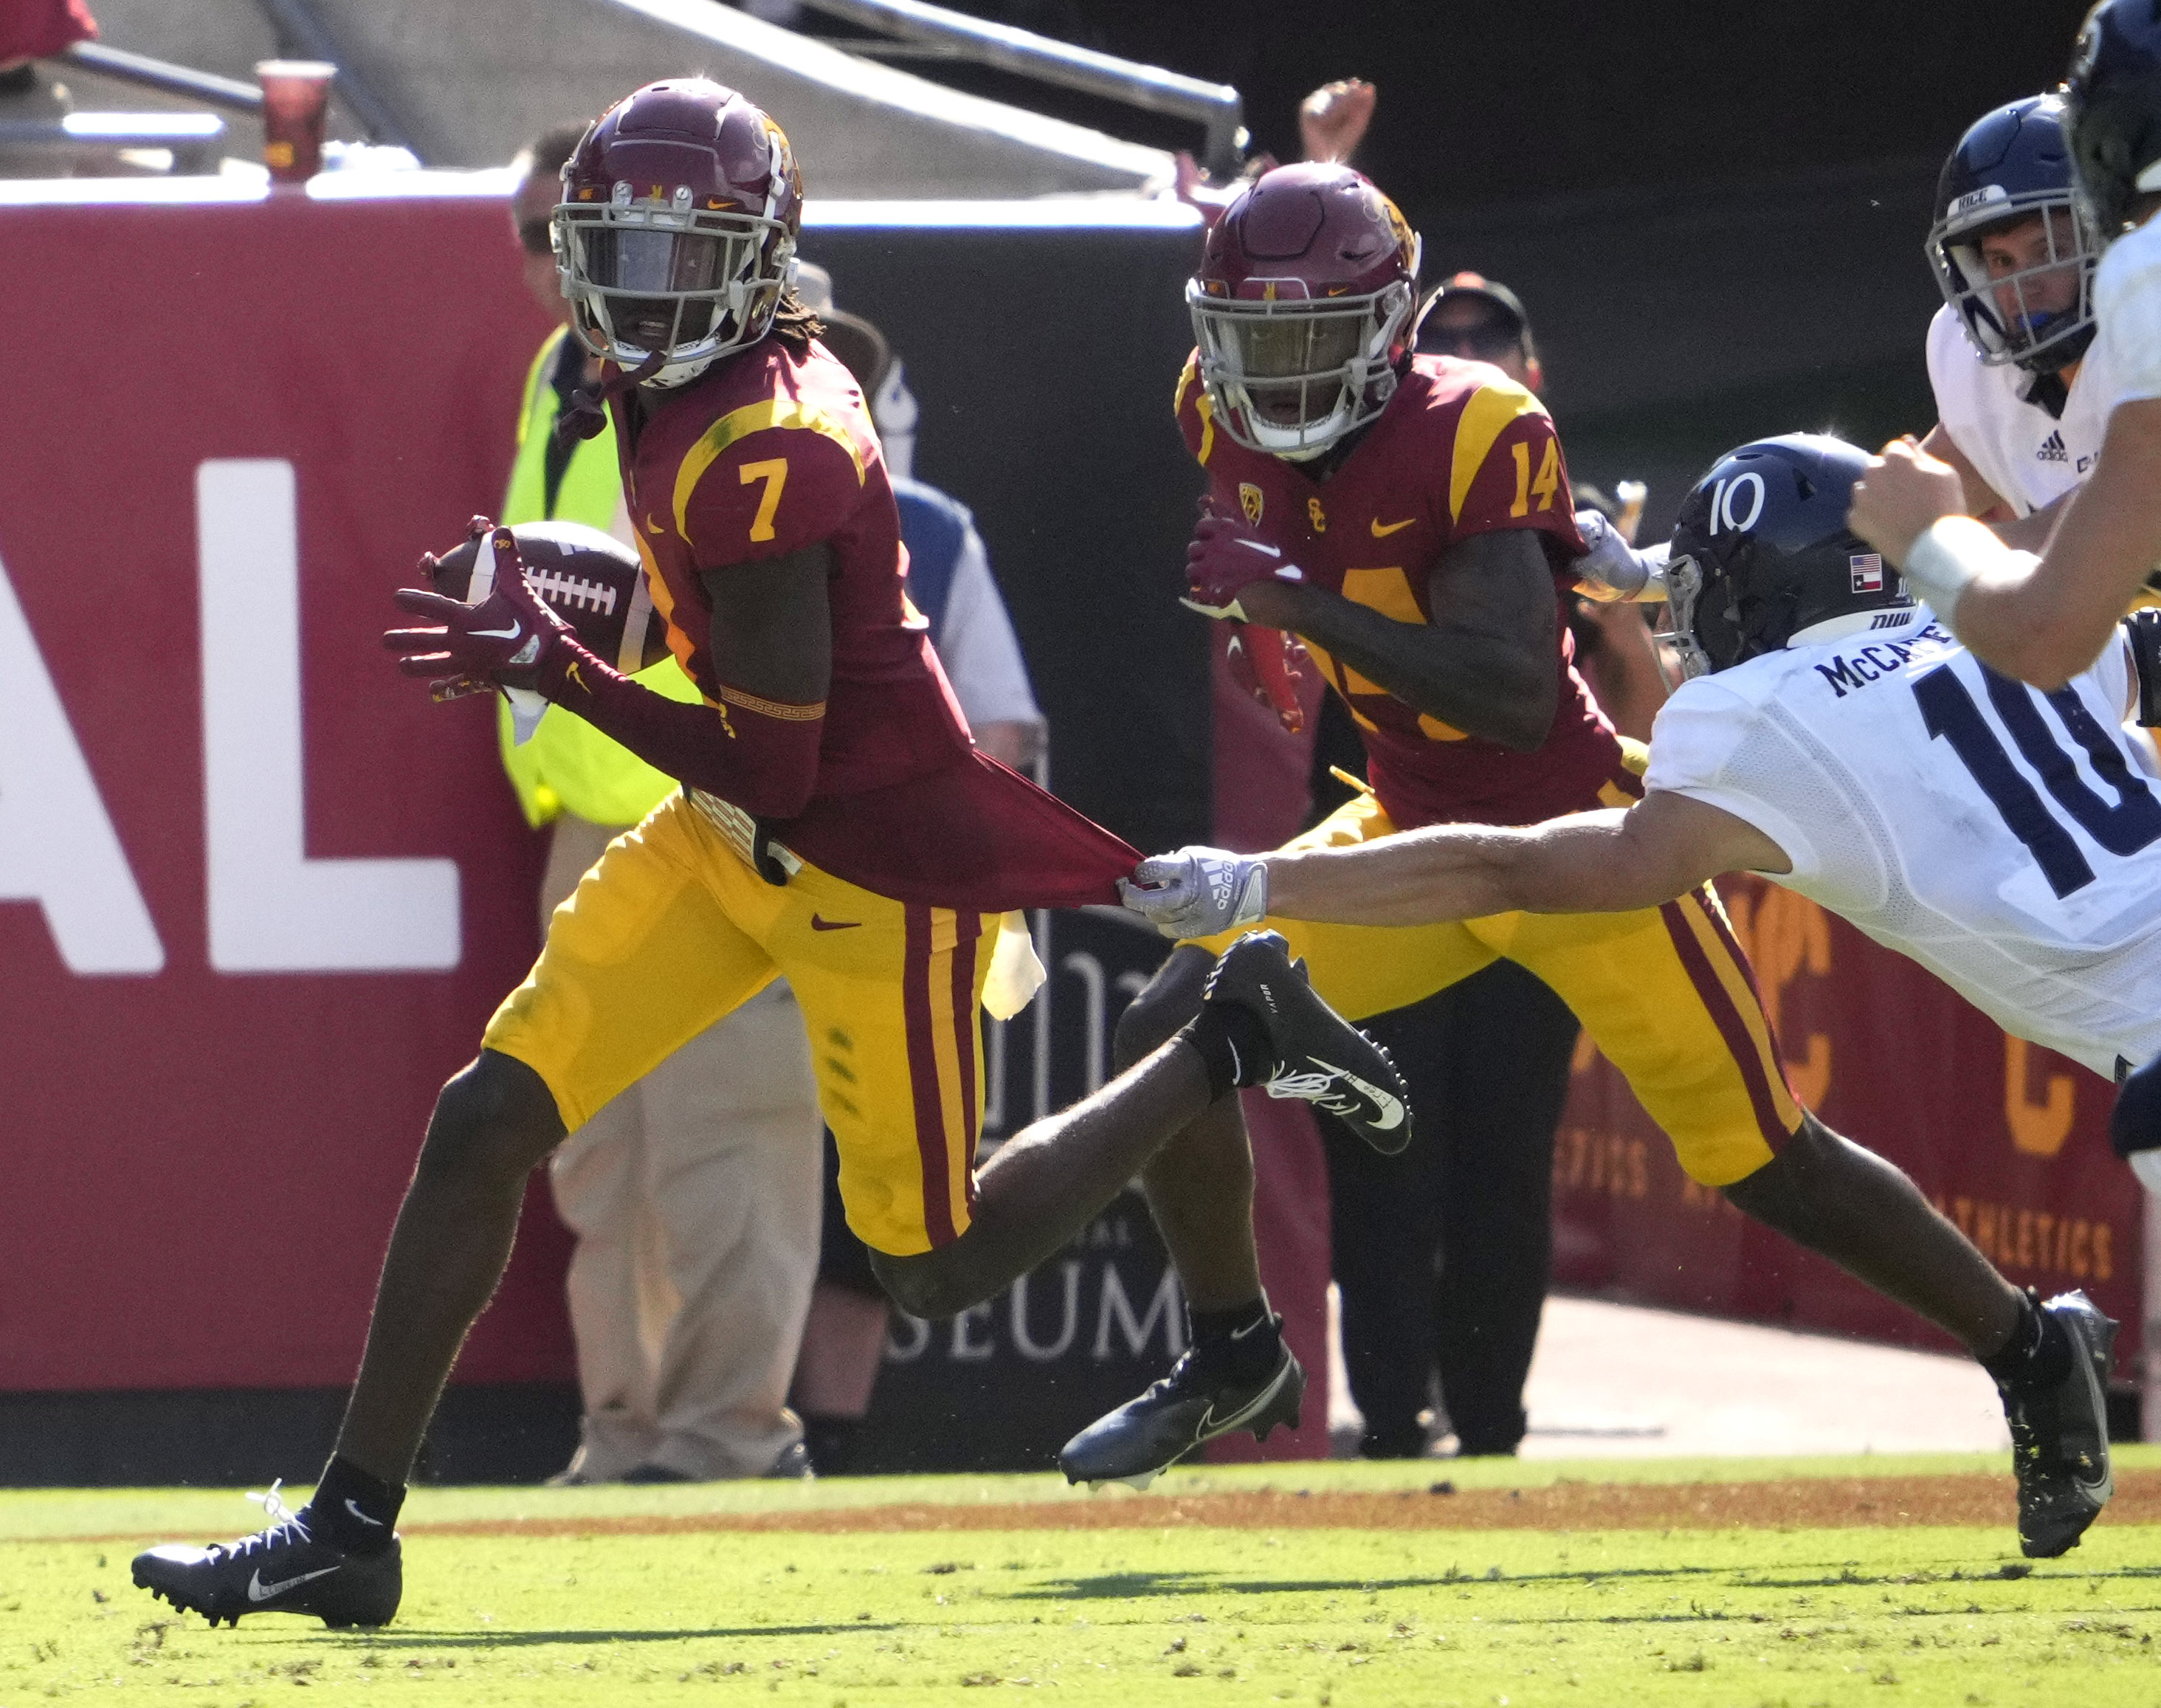 USC Trojans defeated the Rice Owls 66-14 during a NCAA football game at the Los Angeles Memorial Coliseum.